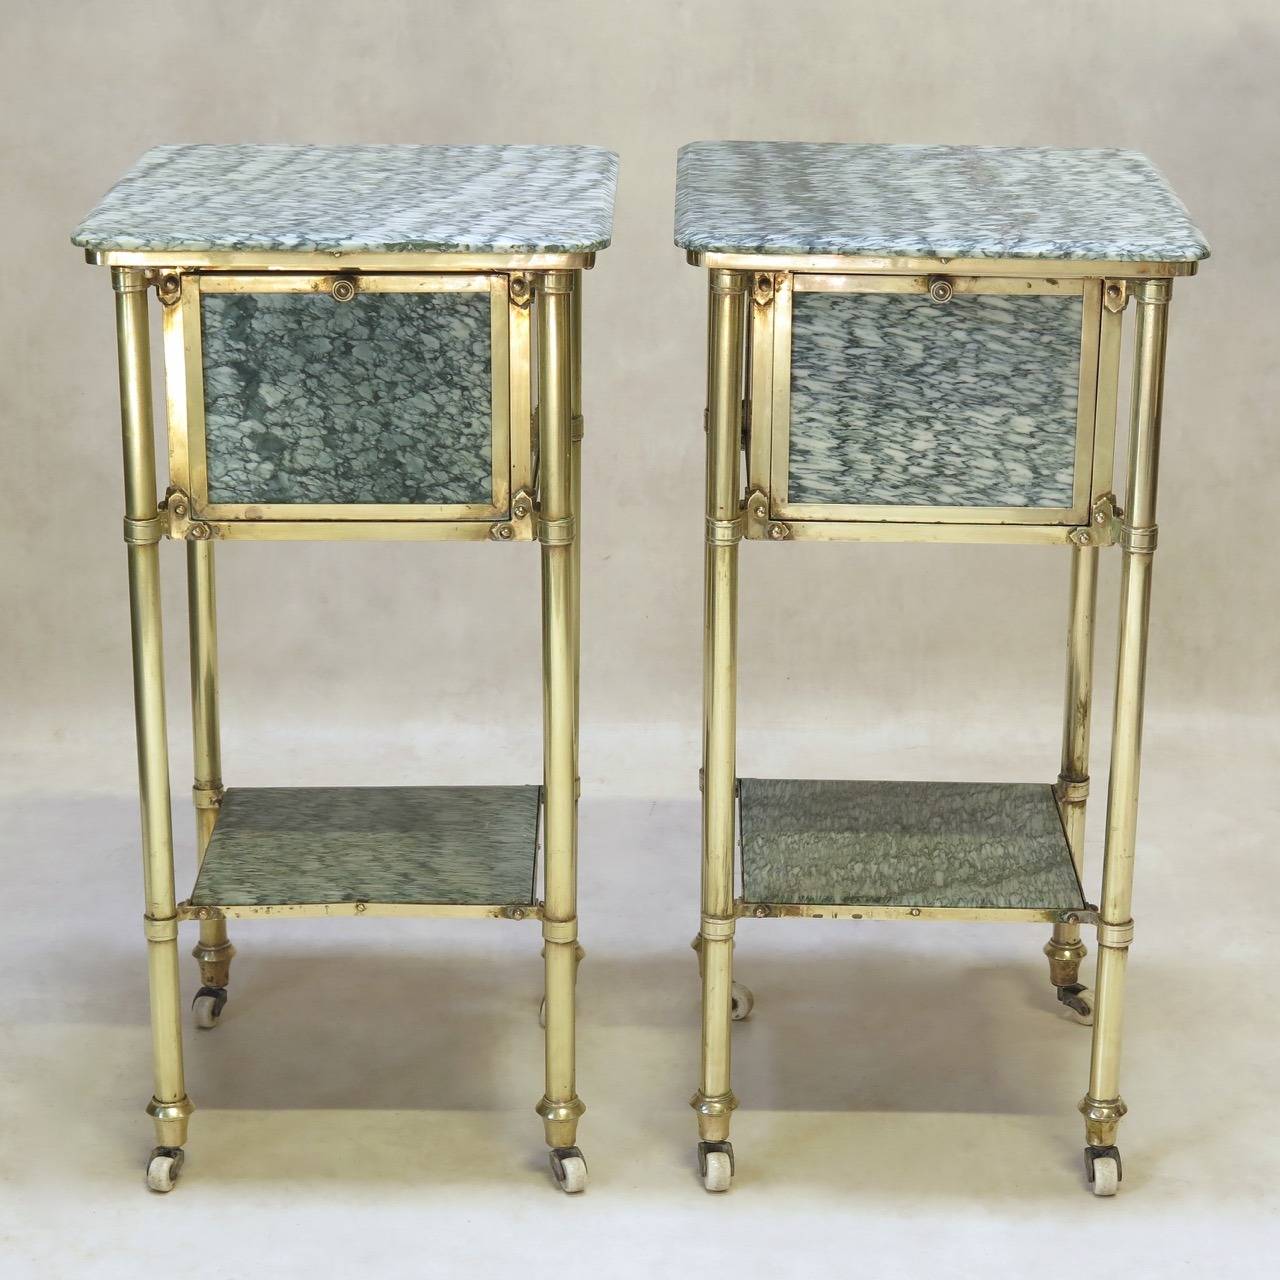 Very chic and nice quality pair of night stands / side tables with a solid brass structure, and rare Campan marble tops, drop-front cabinets and lower shelves. Raised on white porcelain casters.